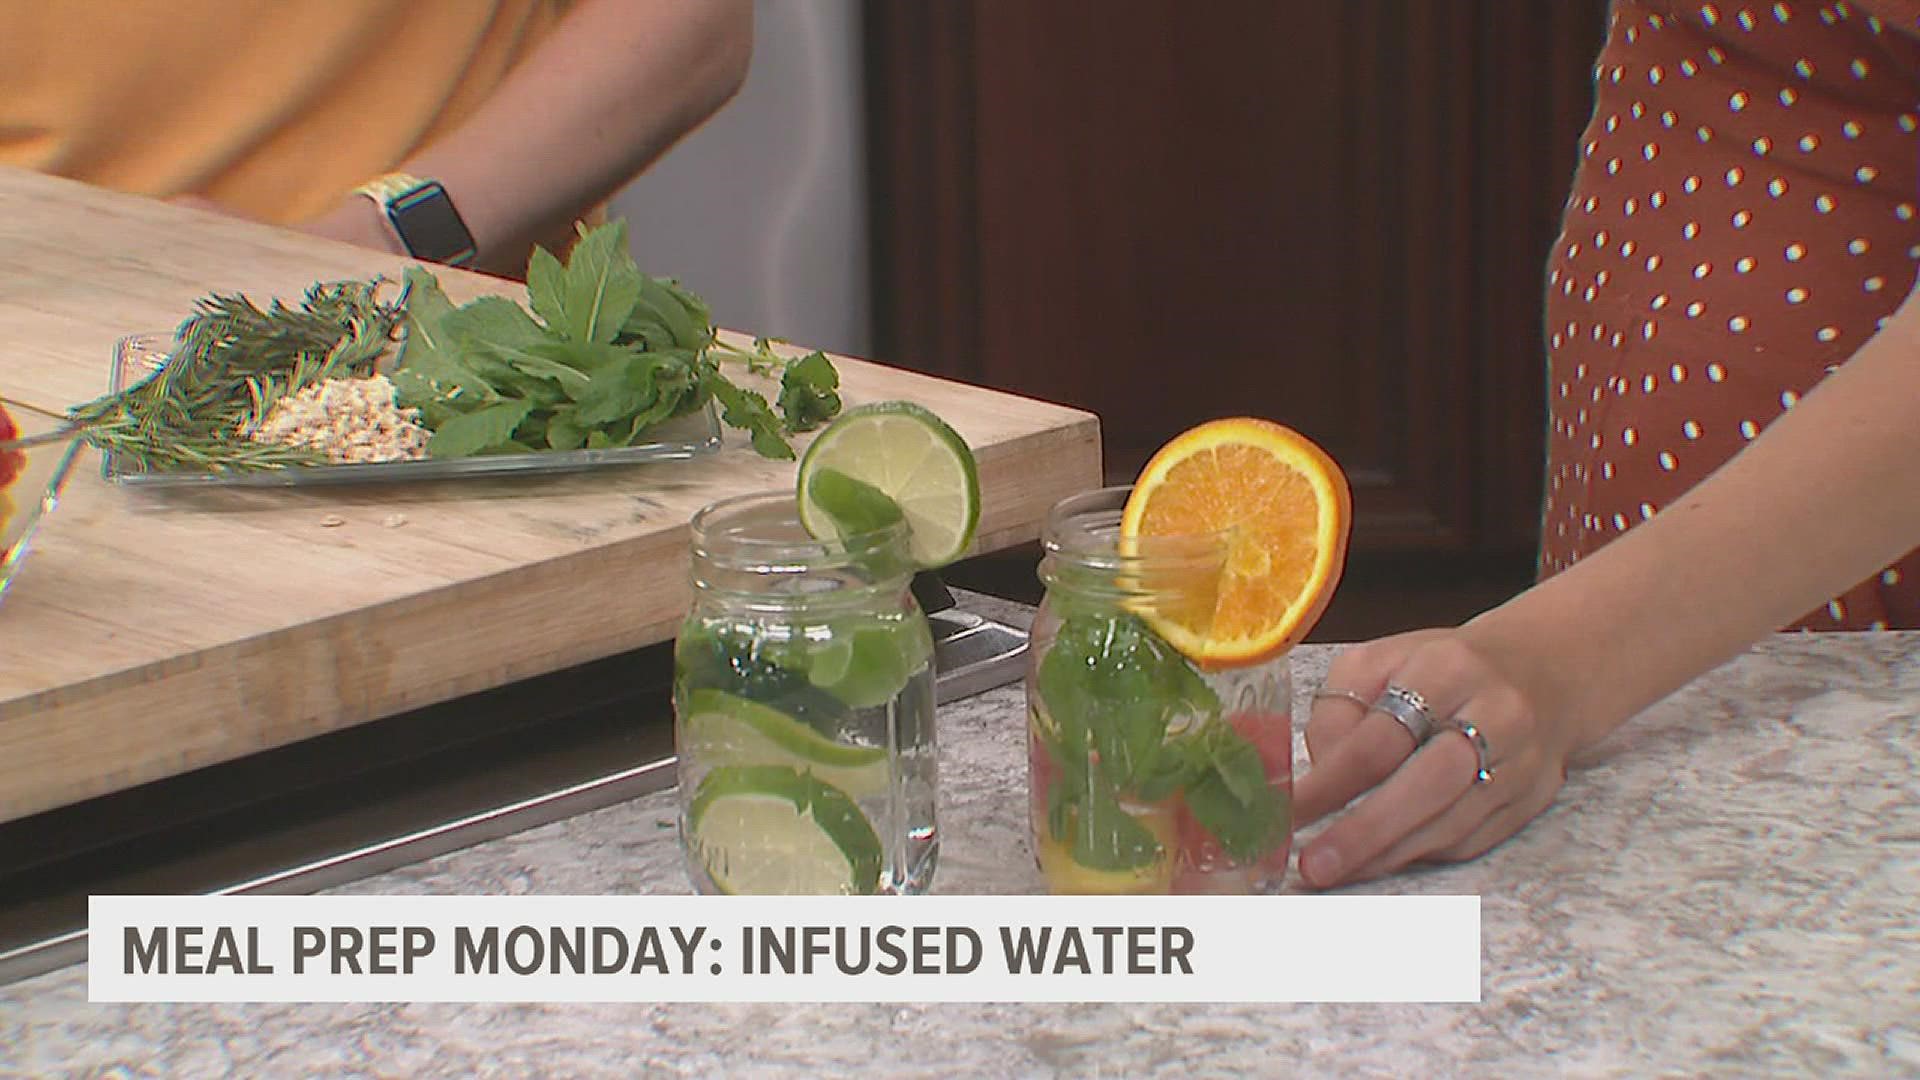 This simple process can make water a bit more interesting with fruit, vegetables, and herbs.